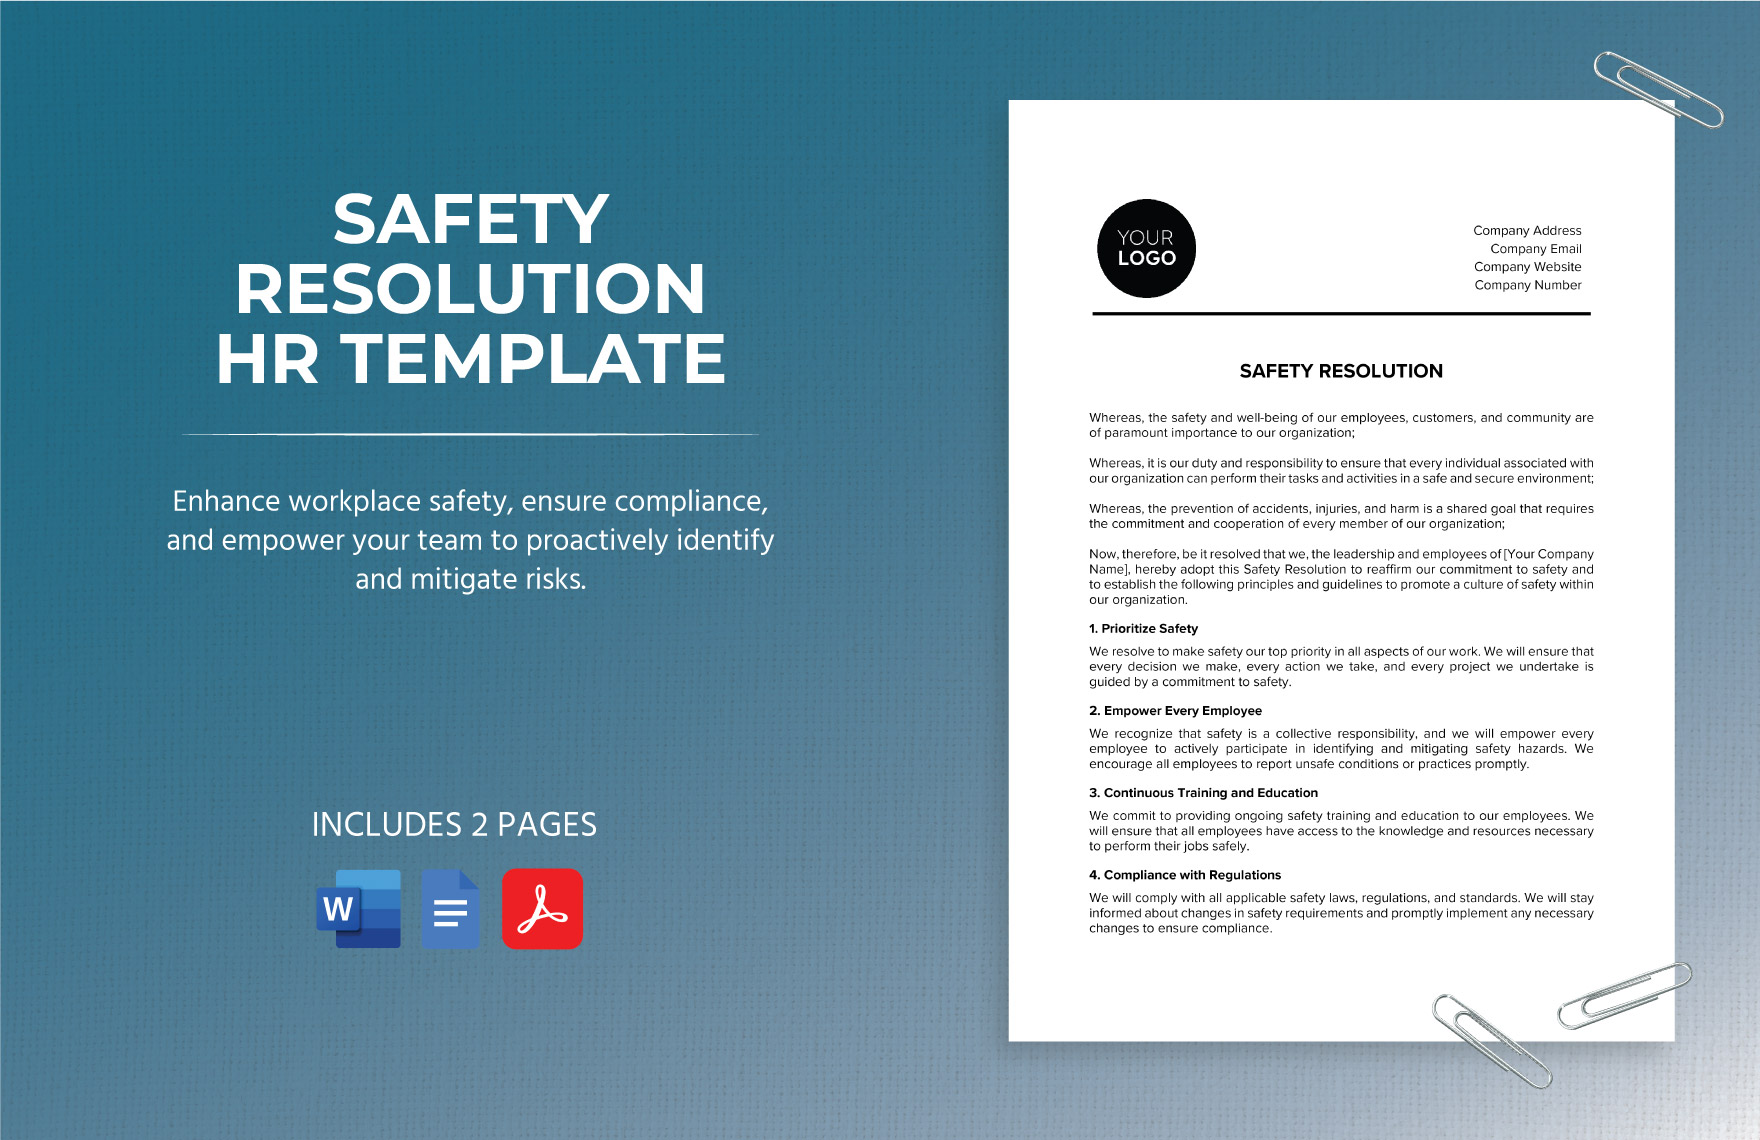 Safety Resolution HR Template in Word, Google Docs, PDF